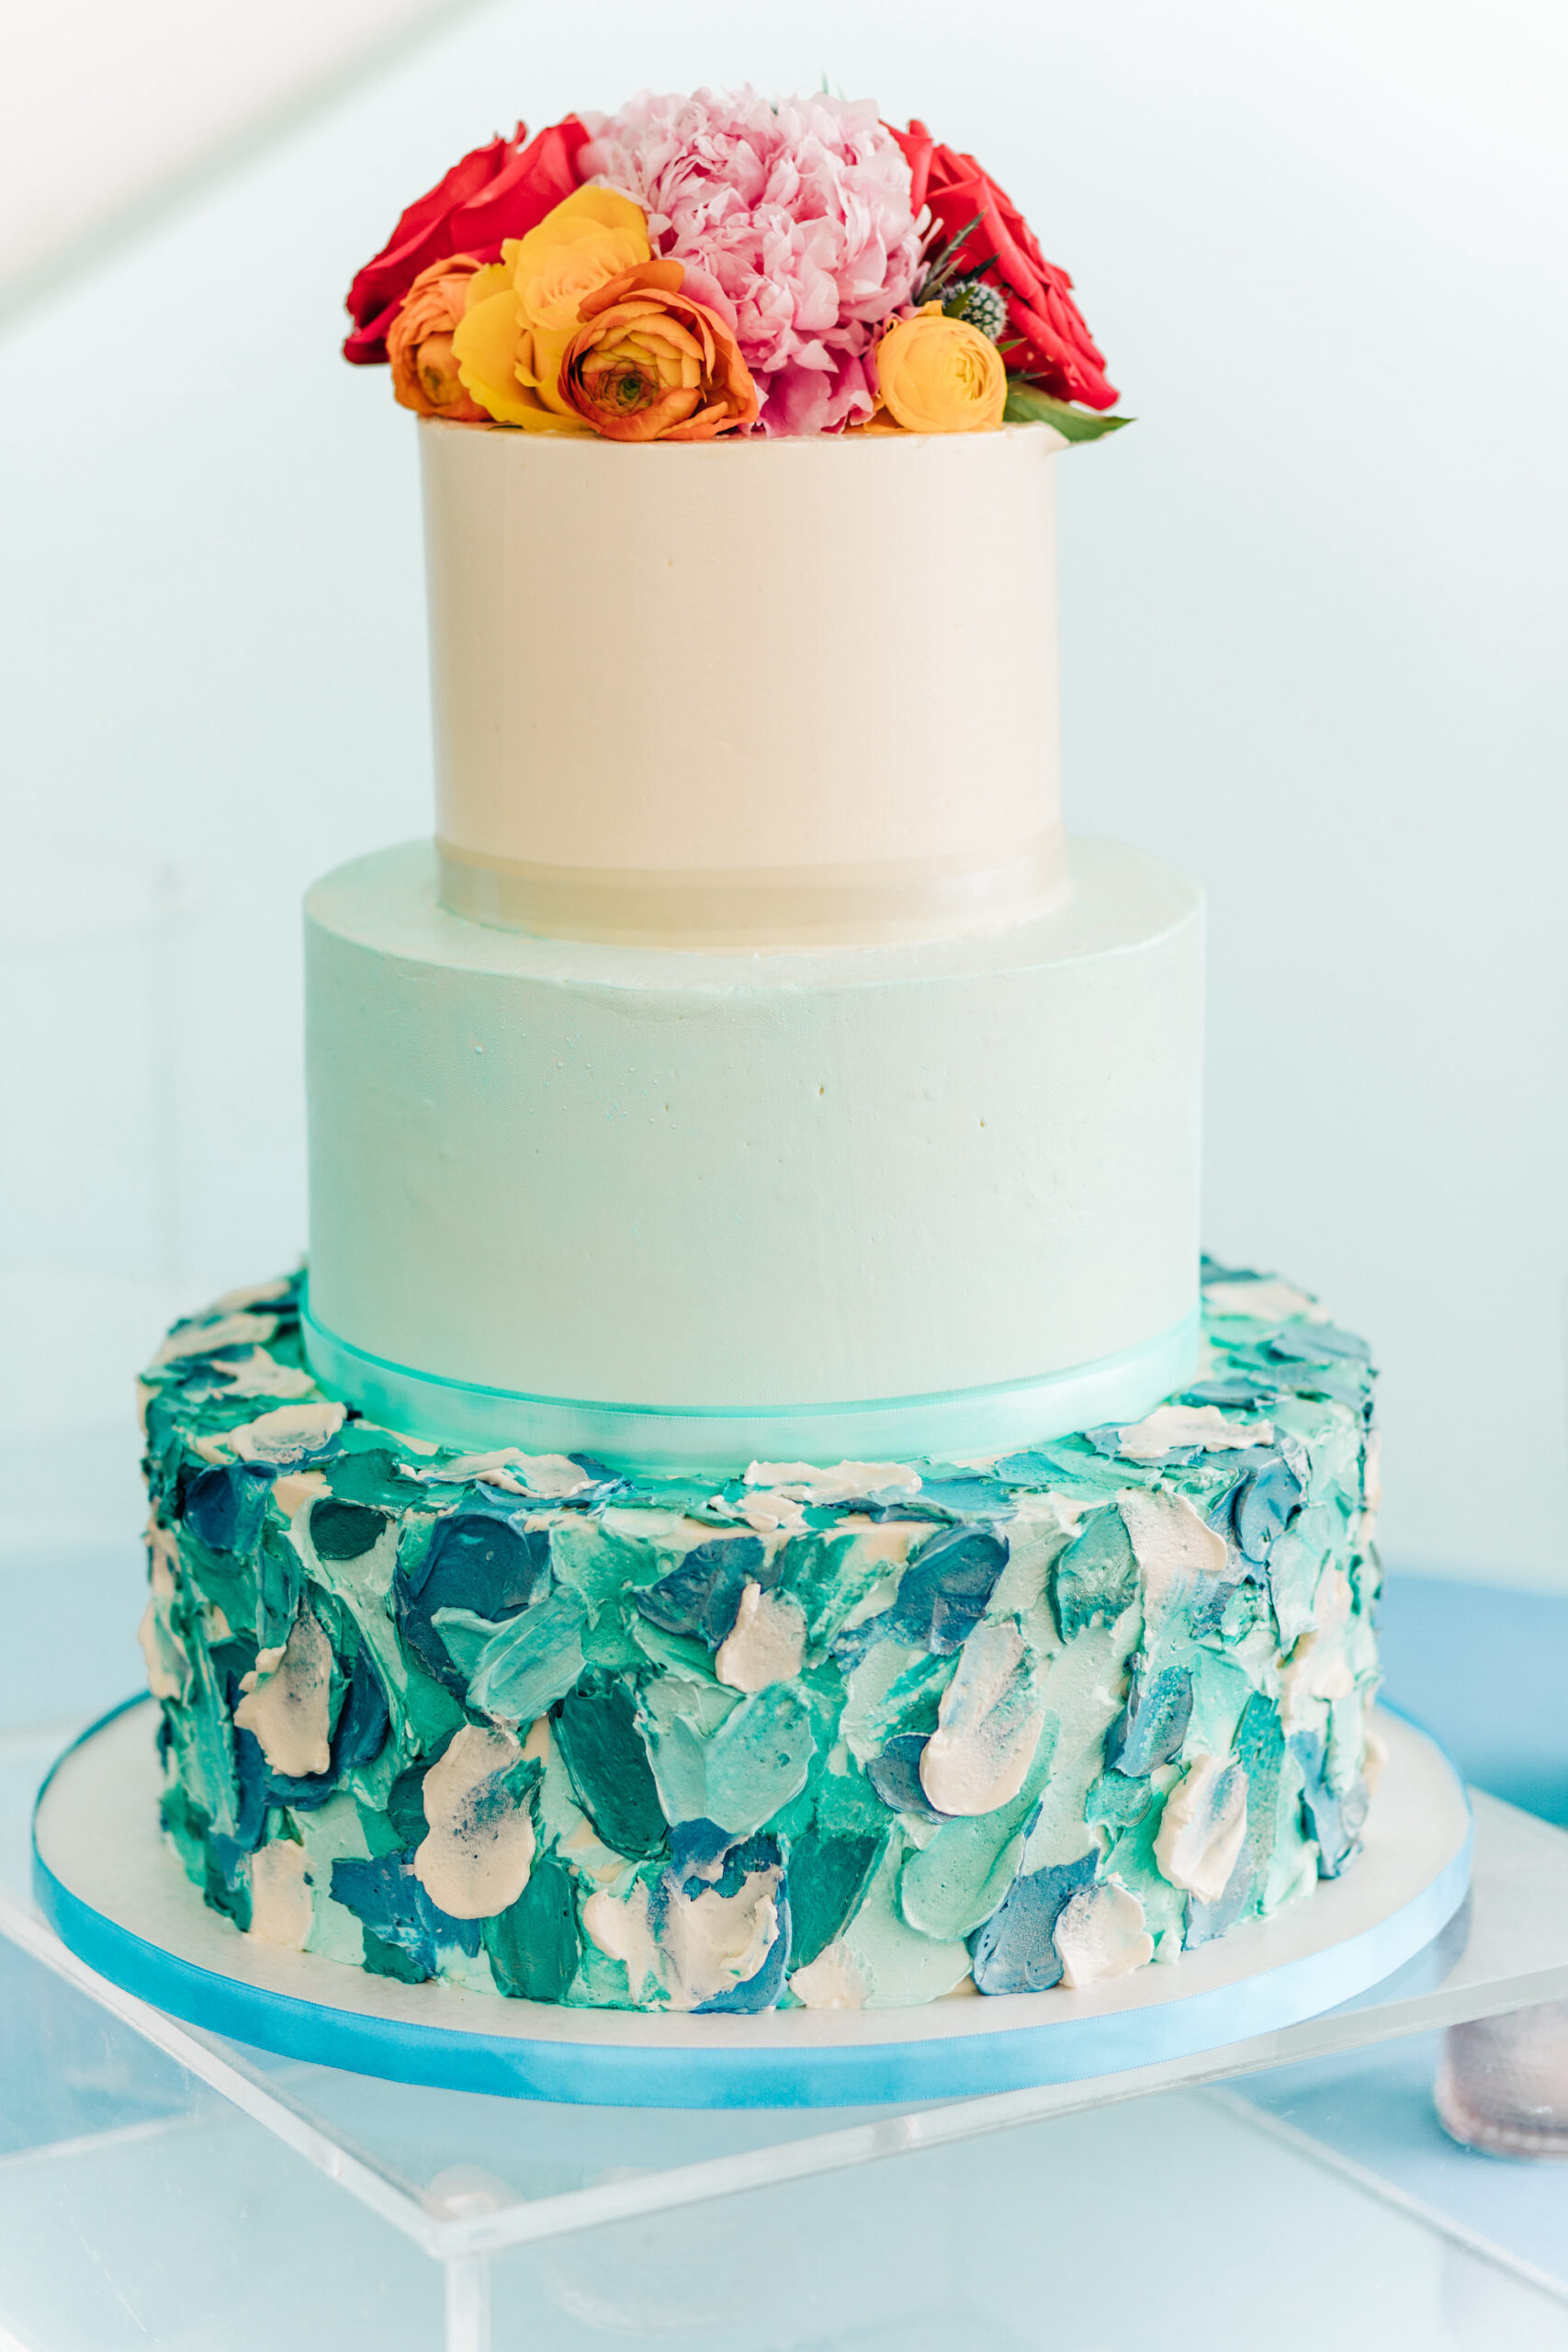 Vibrant Colorful Wedding Reception, Three Tier Blue and White Buttercream Textured Wedding Cake, Yellow and Red Roses with Pink Flower Cake Topper